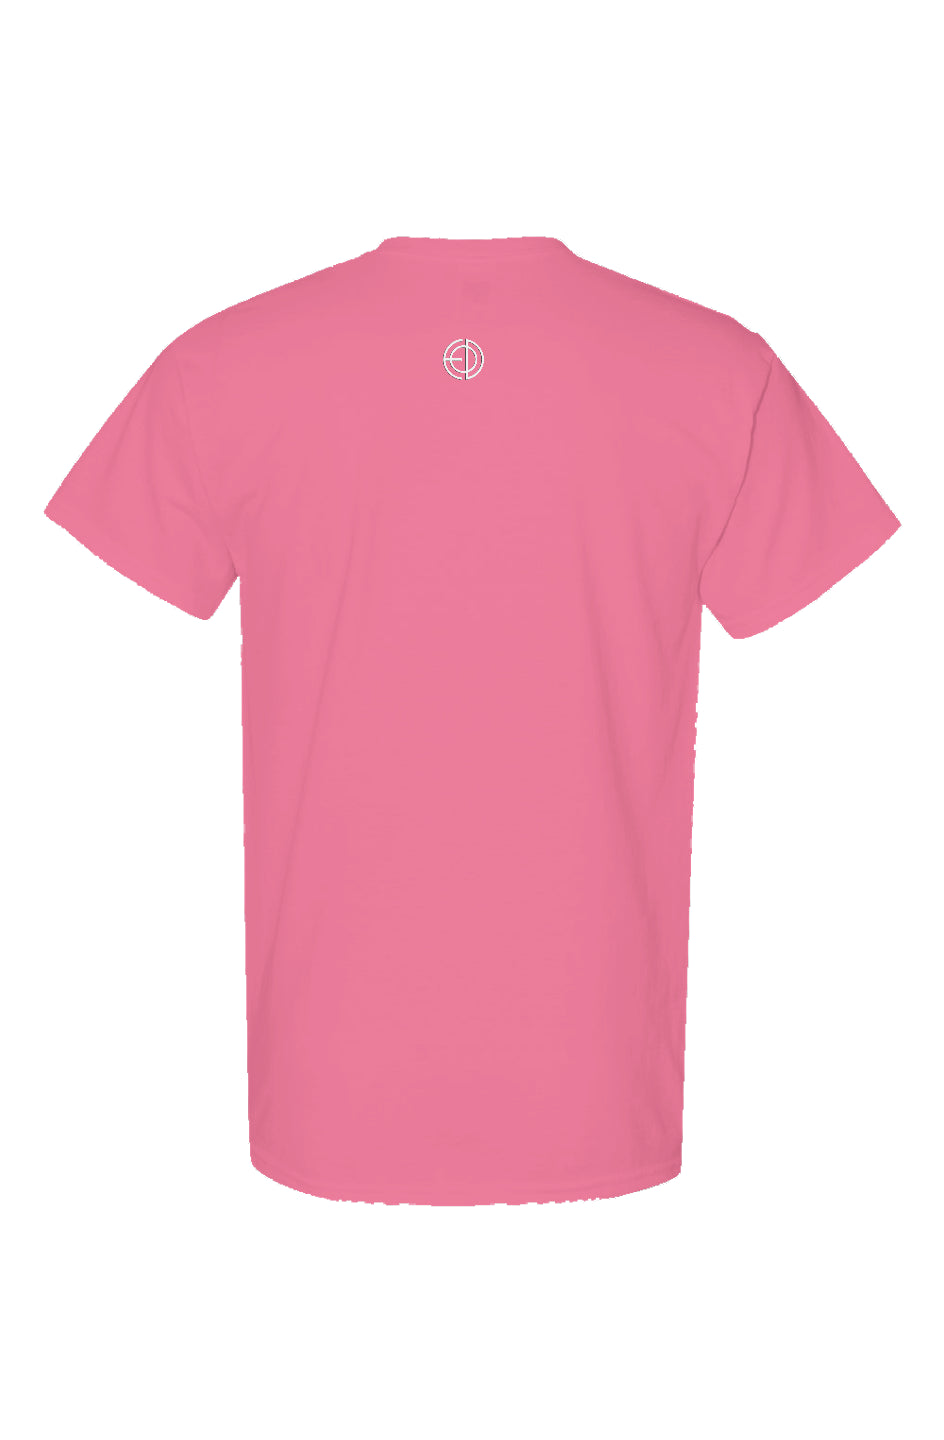 EOD 3OD Neon Tee in Safety Pink